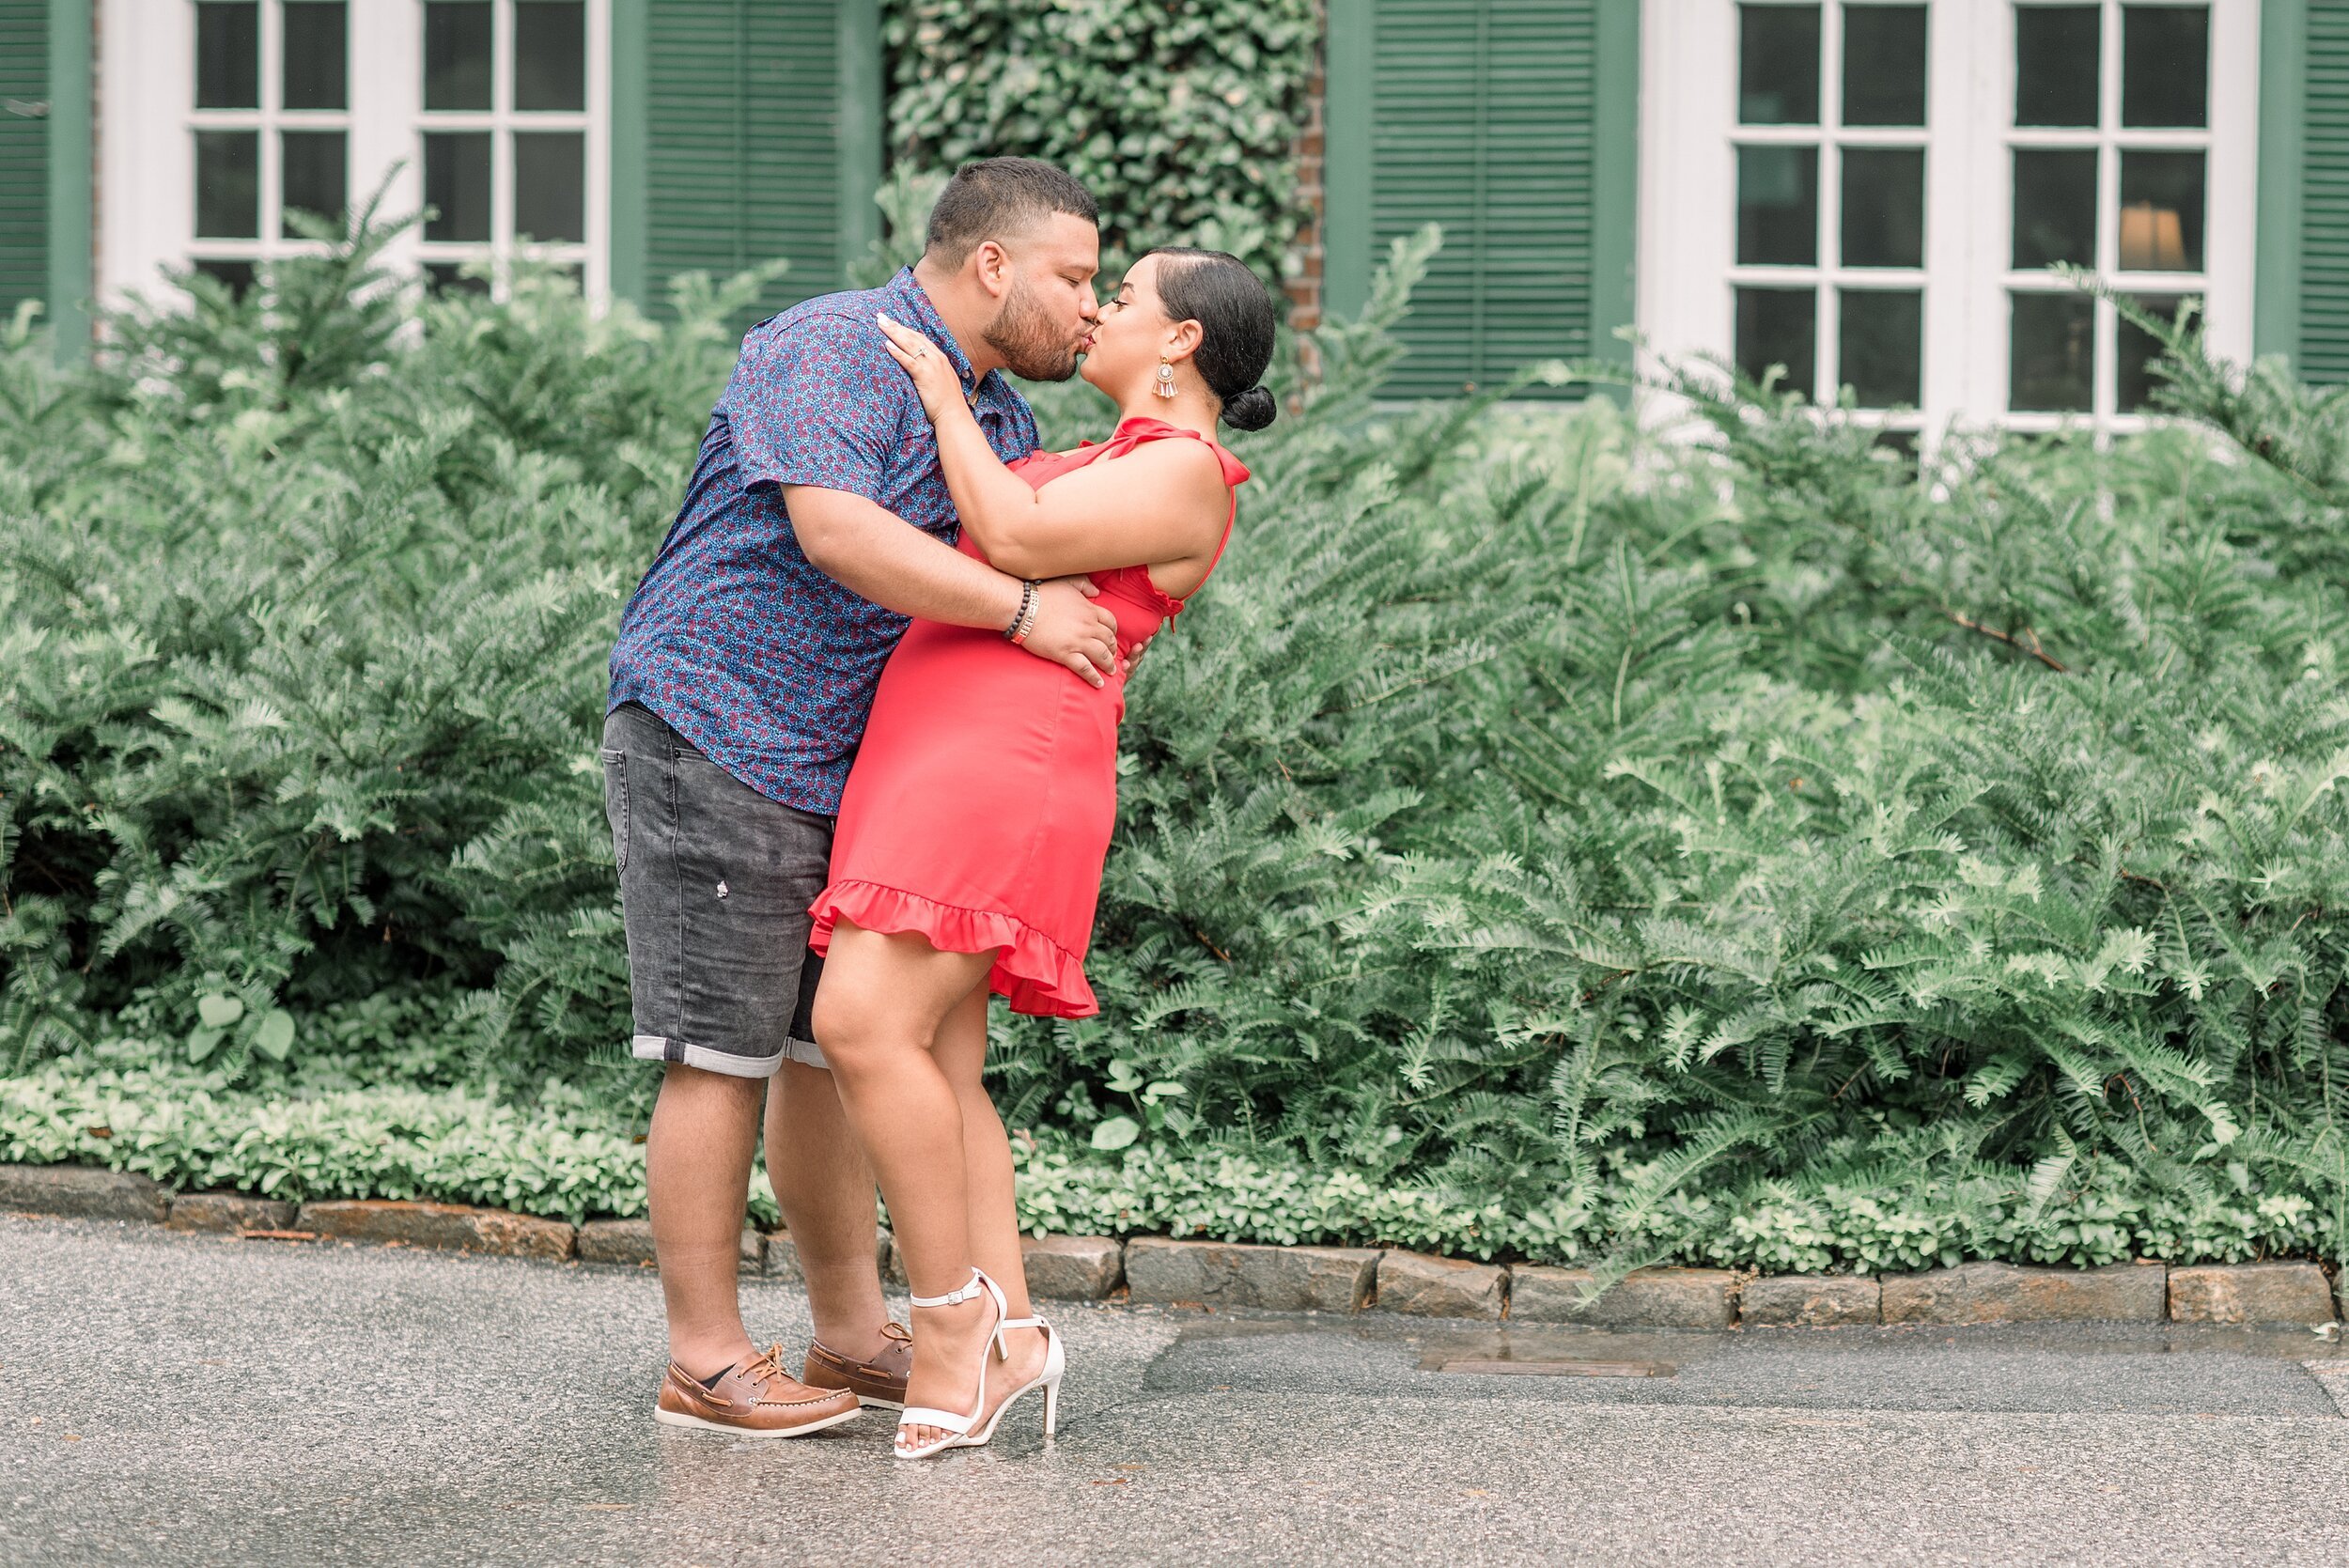 Longwood Gardens Kennet Square Pa Summer Engagement Session Photography_7677.jpg